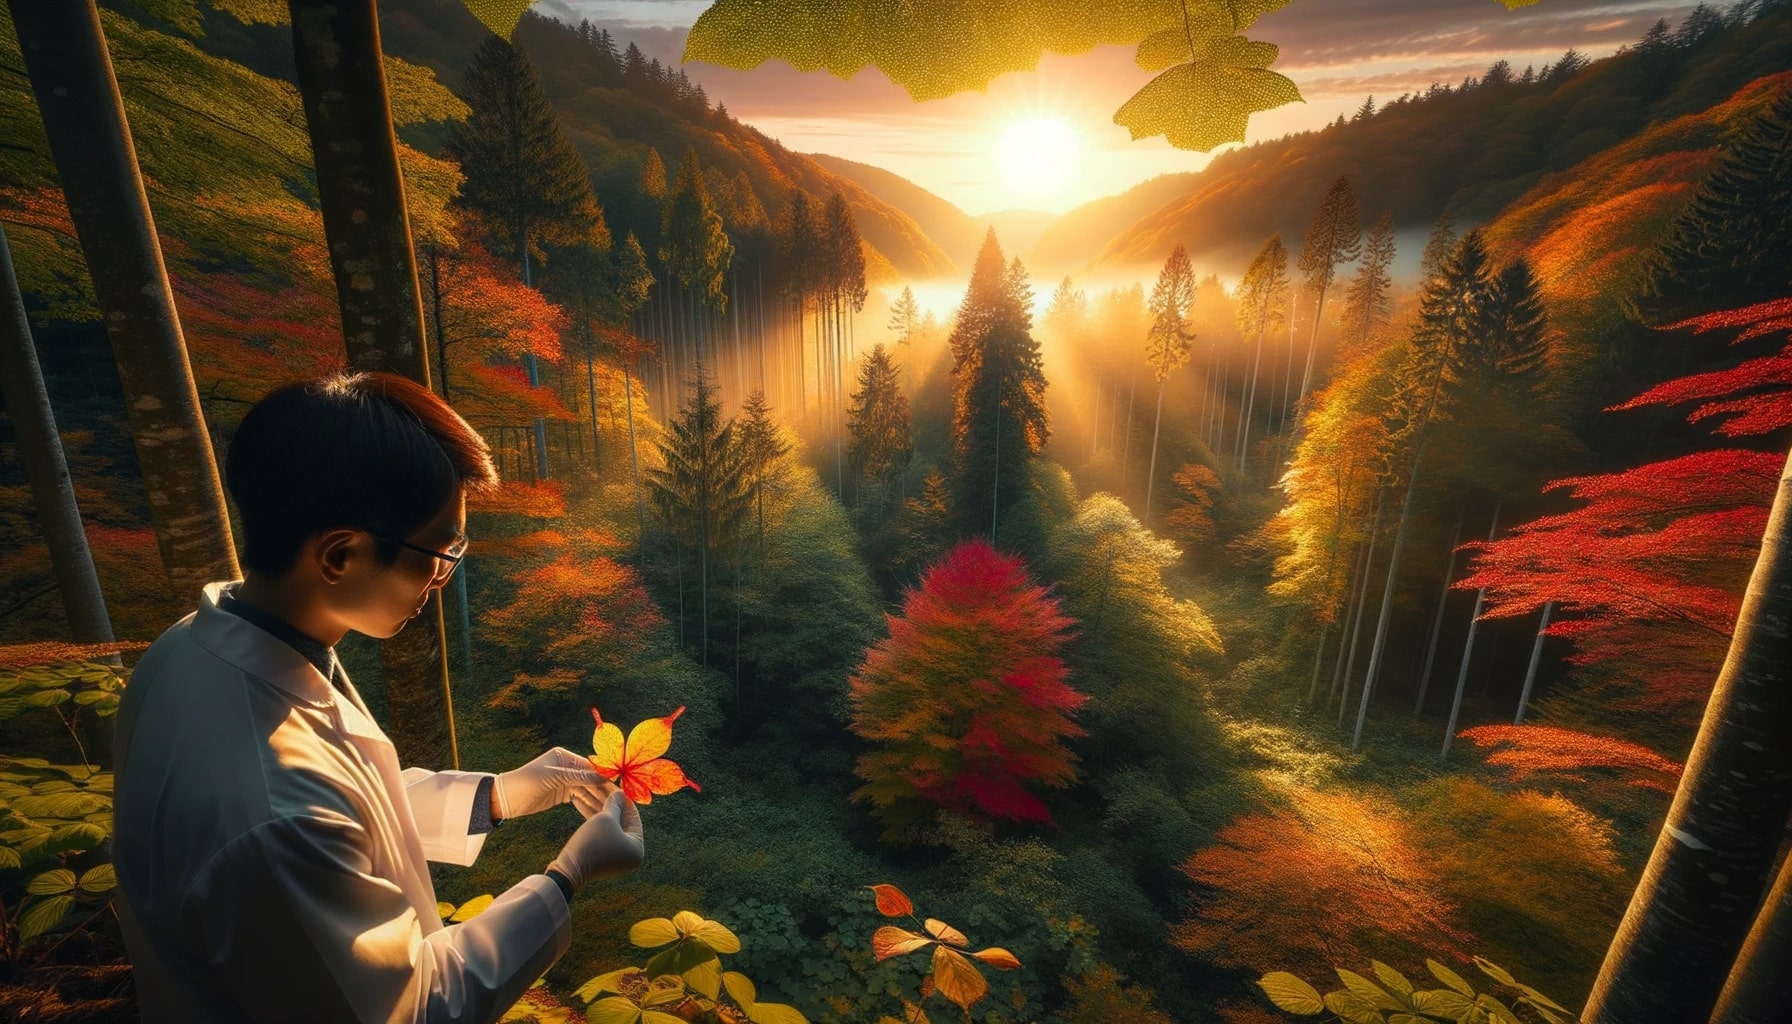 A breathtaking view of a dense forest at the cusp of autumn. Sunlight filters through trees, revealing a mix of green and fiery autumn colors. In the foreground, a scientist of Asian descent examines a colorful leaf, with the setting sun enhancing the backdrop.